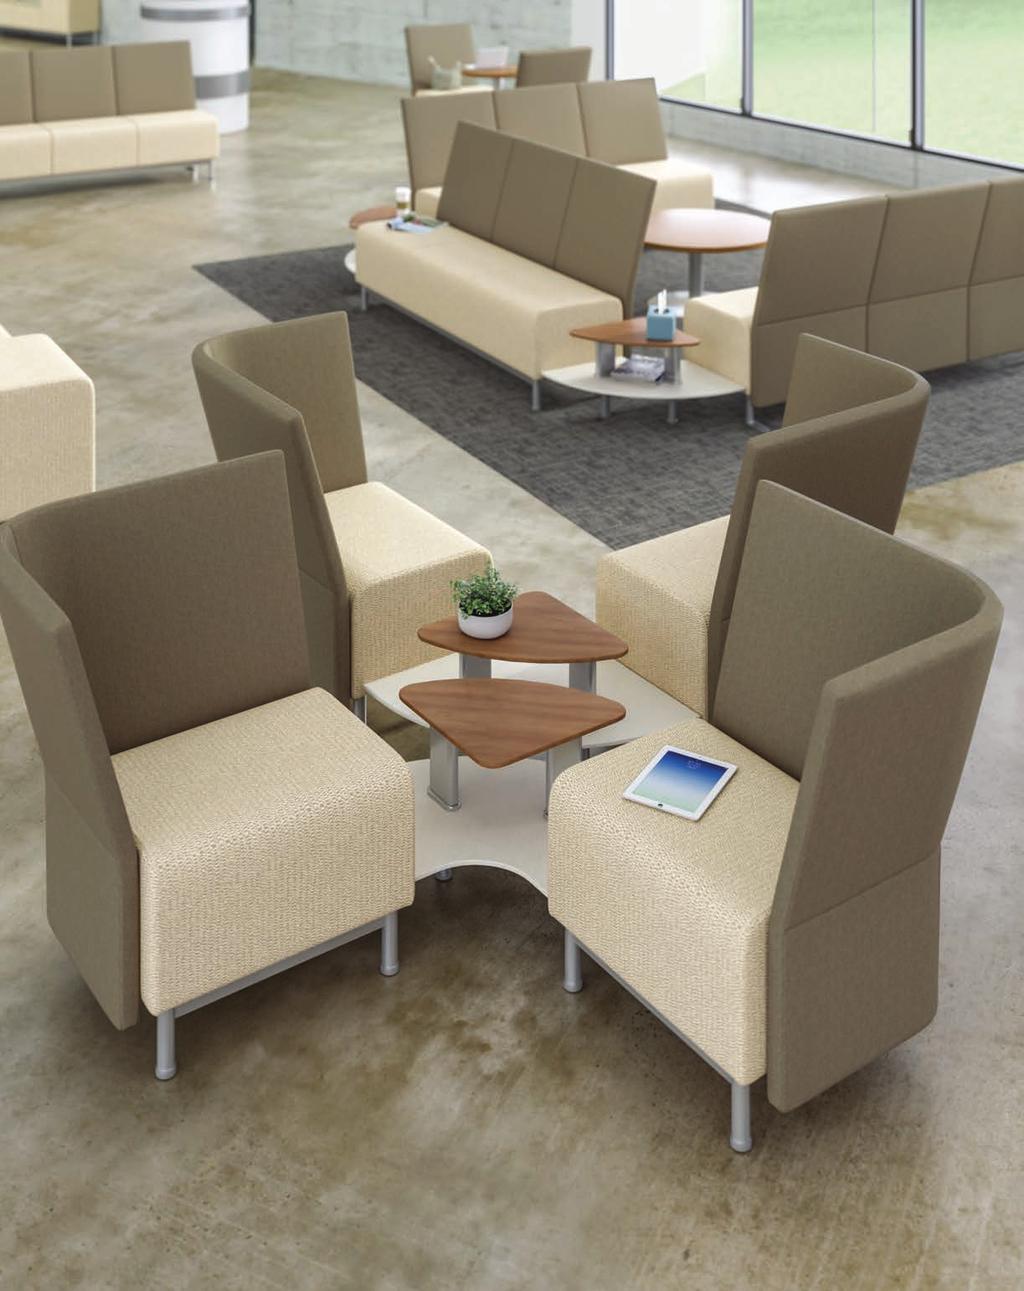 Versatile Asset Neighbor seats, tables and armrests configure in modular units to meet multiple needs, including alternative postures, bariatric support and privacy.